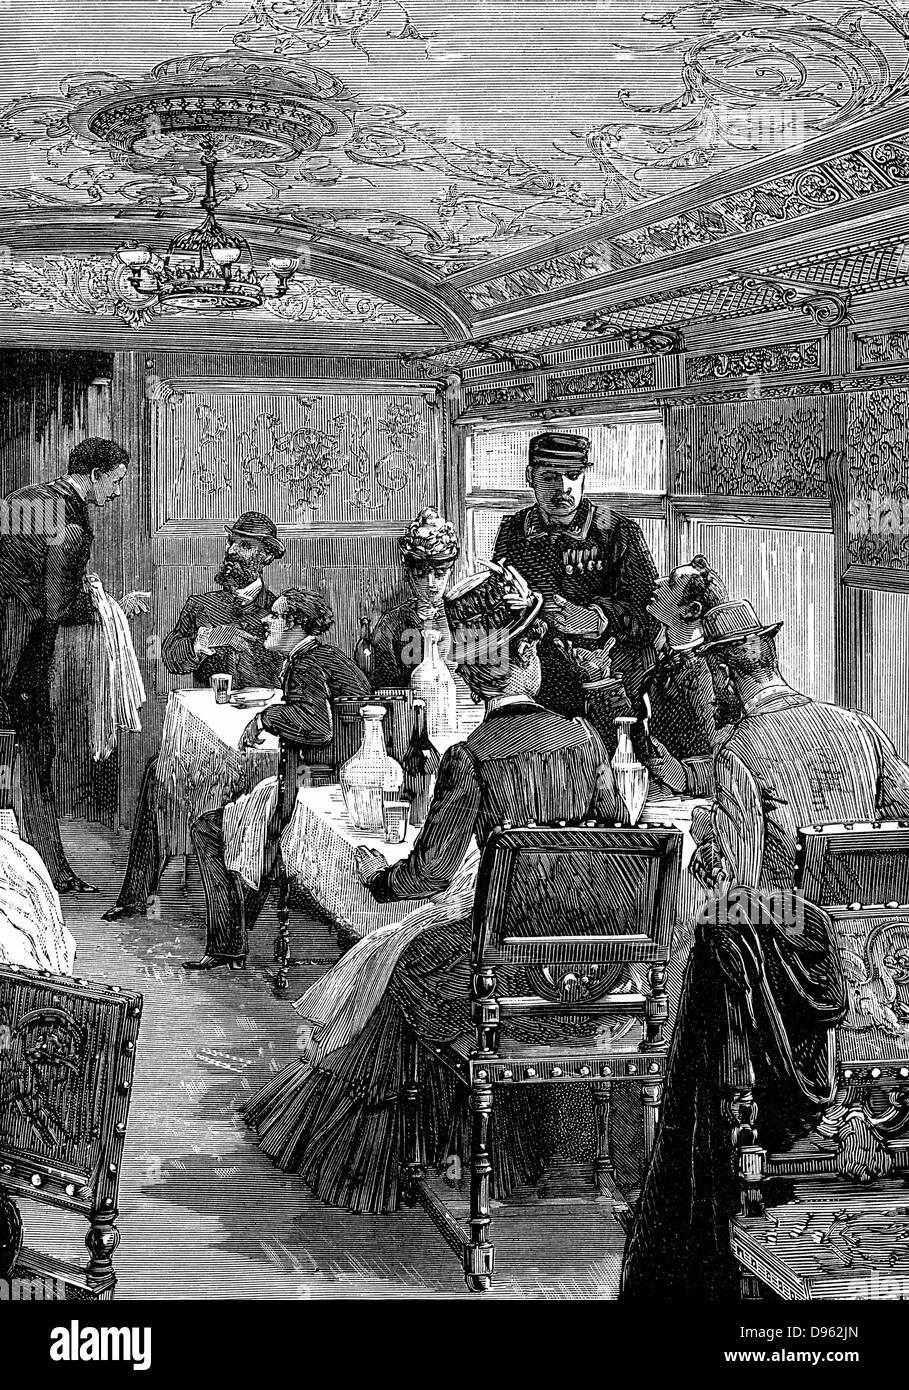 Dining car on the Orient Express.   Wood engraving published Paris, c1885. Stock Photo